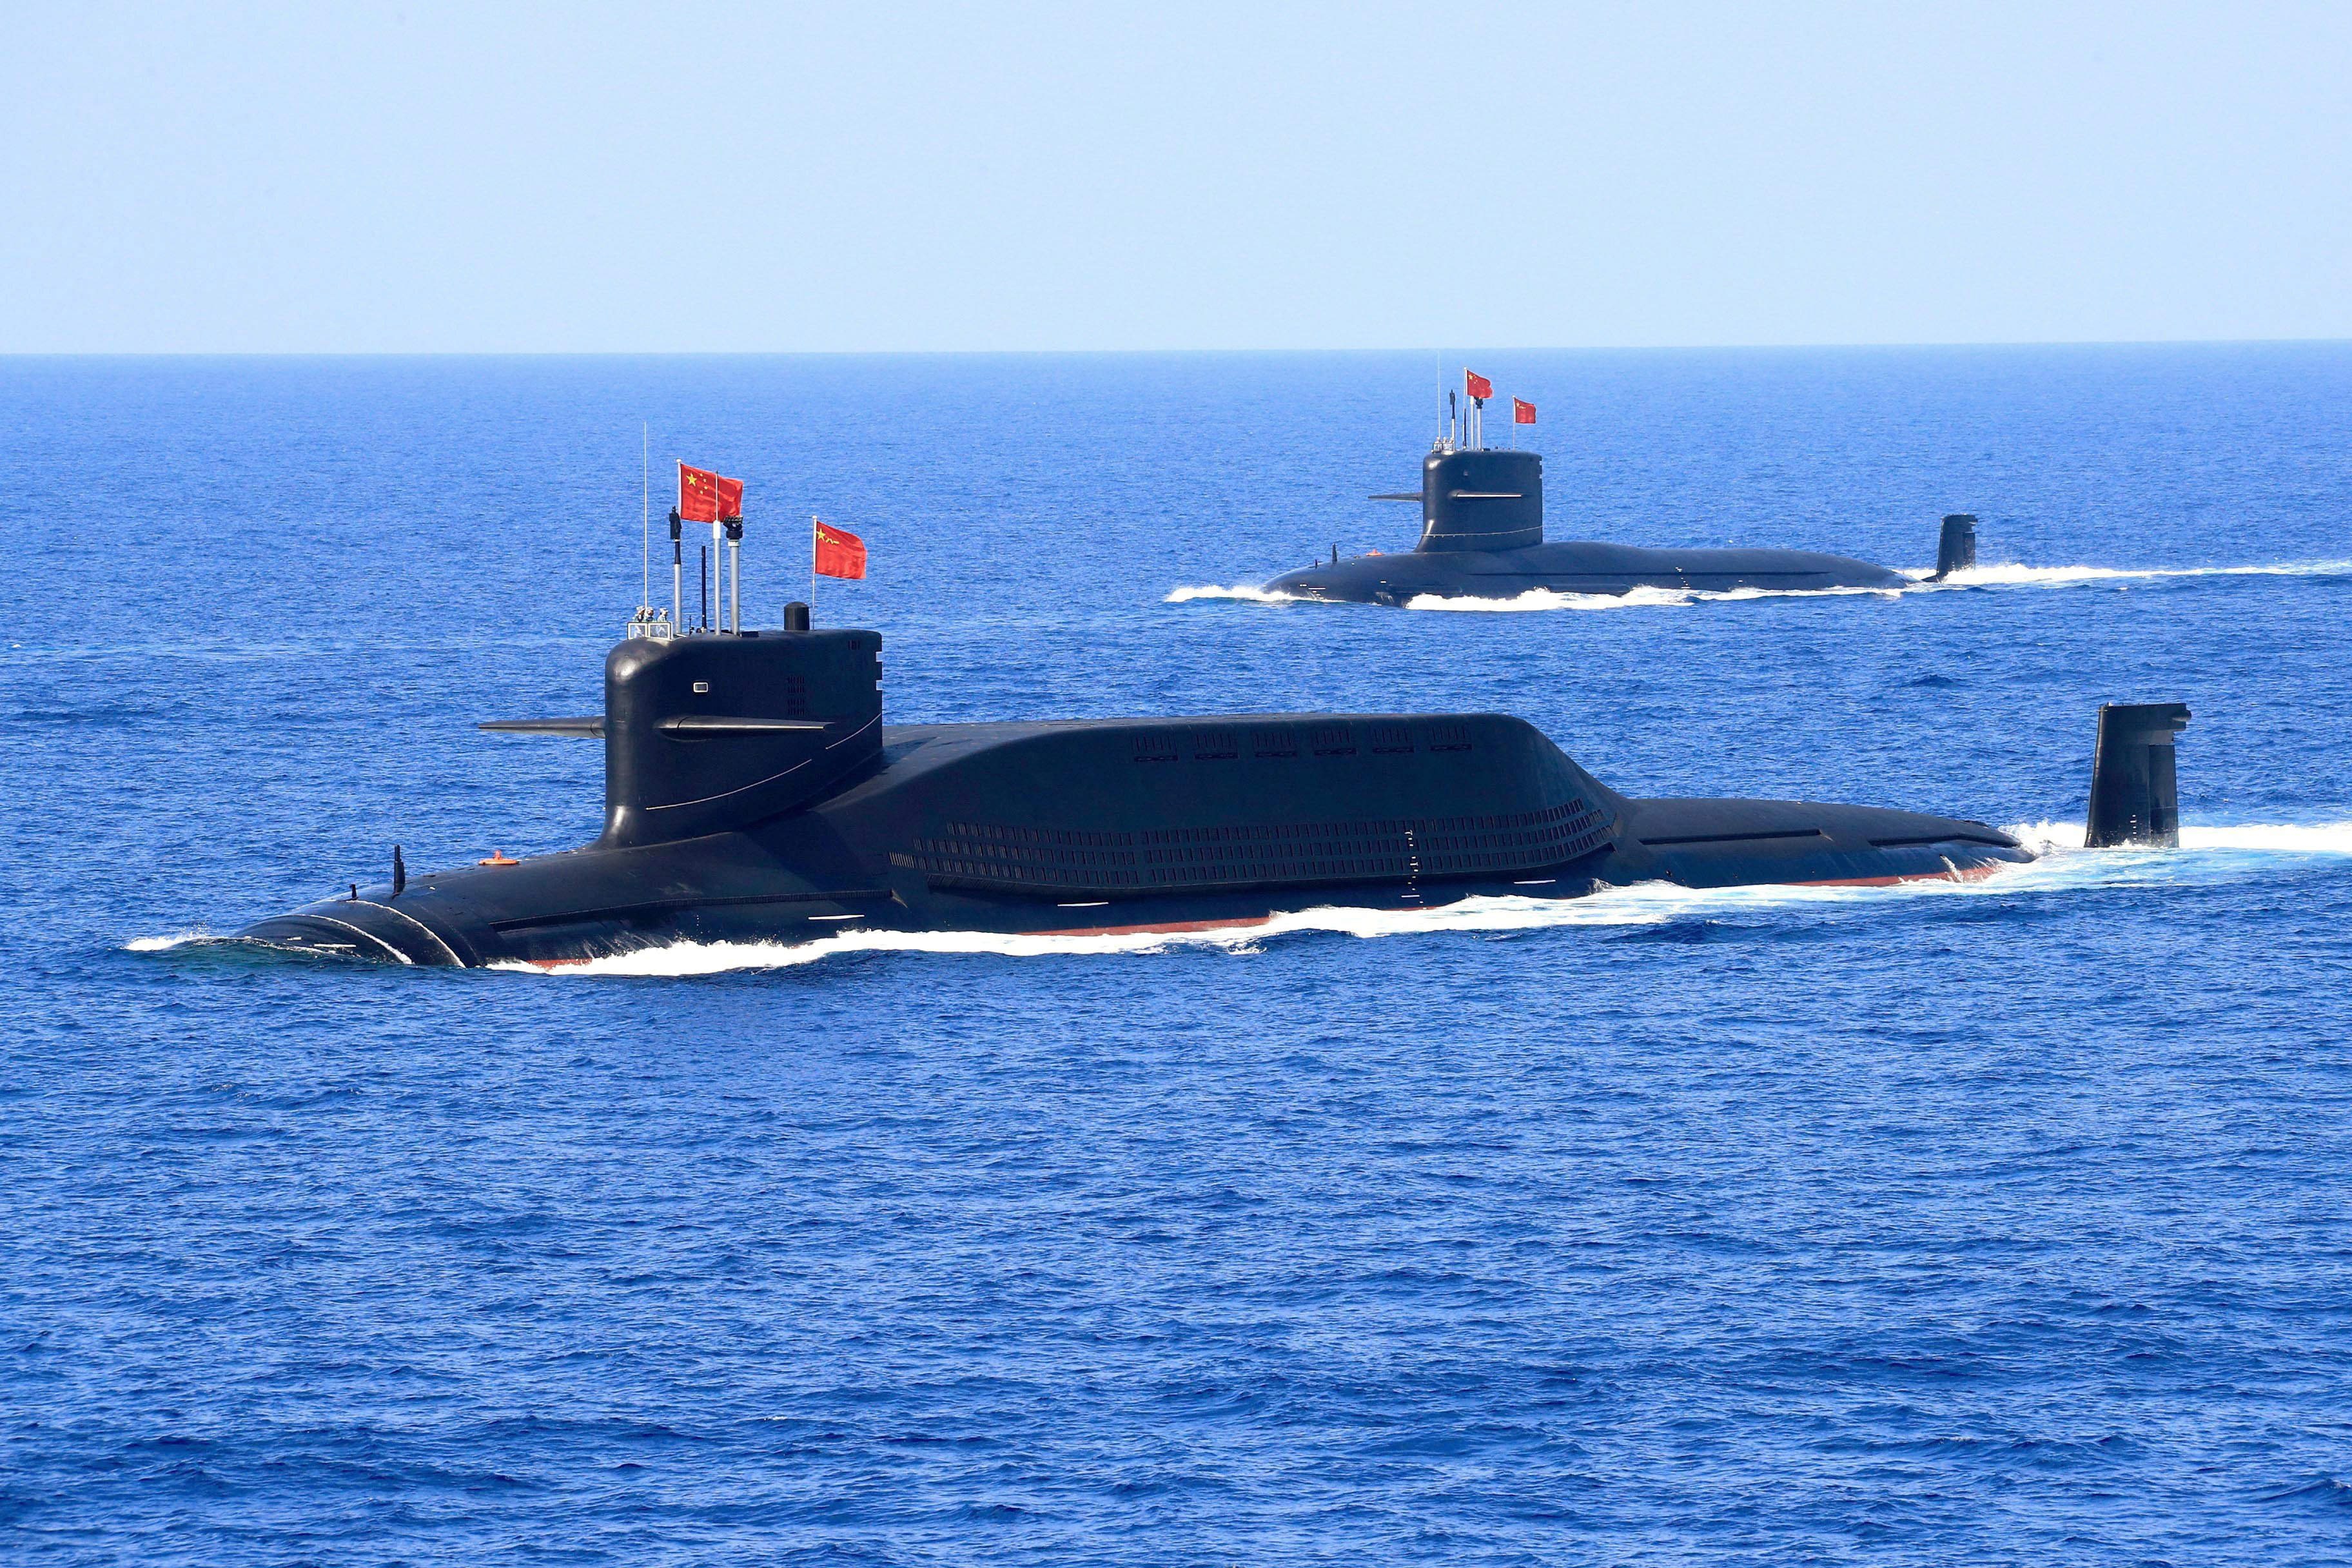 A team of researchers in China has moved closer towards developing a laser-based propulsion system for submarines. Photo: Reuters